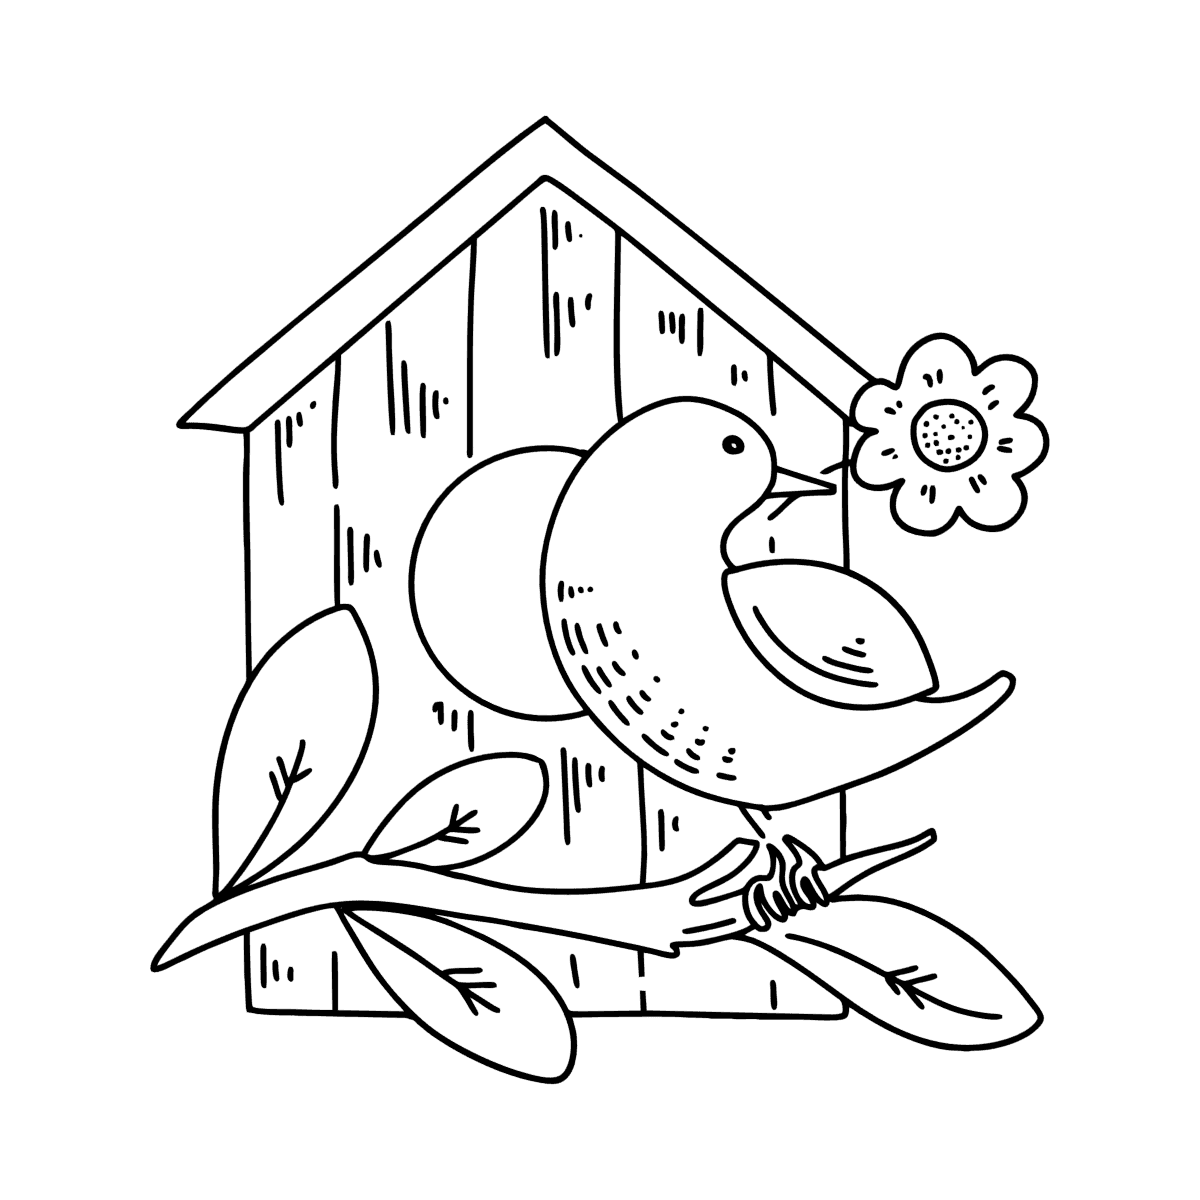 Starling at the Birdhouse coloring page ♥ Online and Print for Free